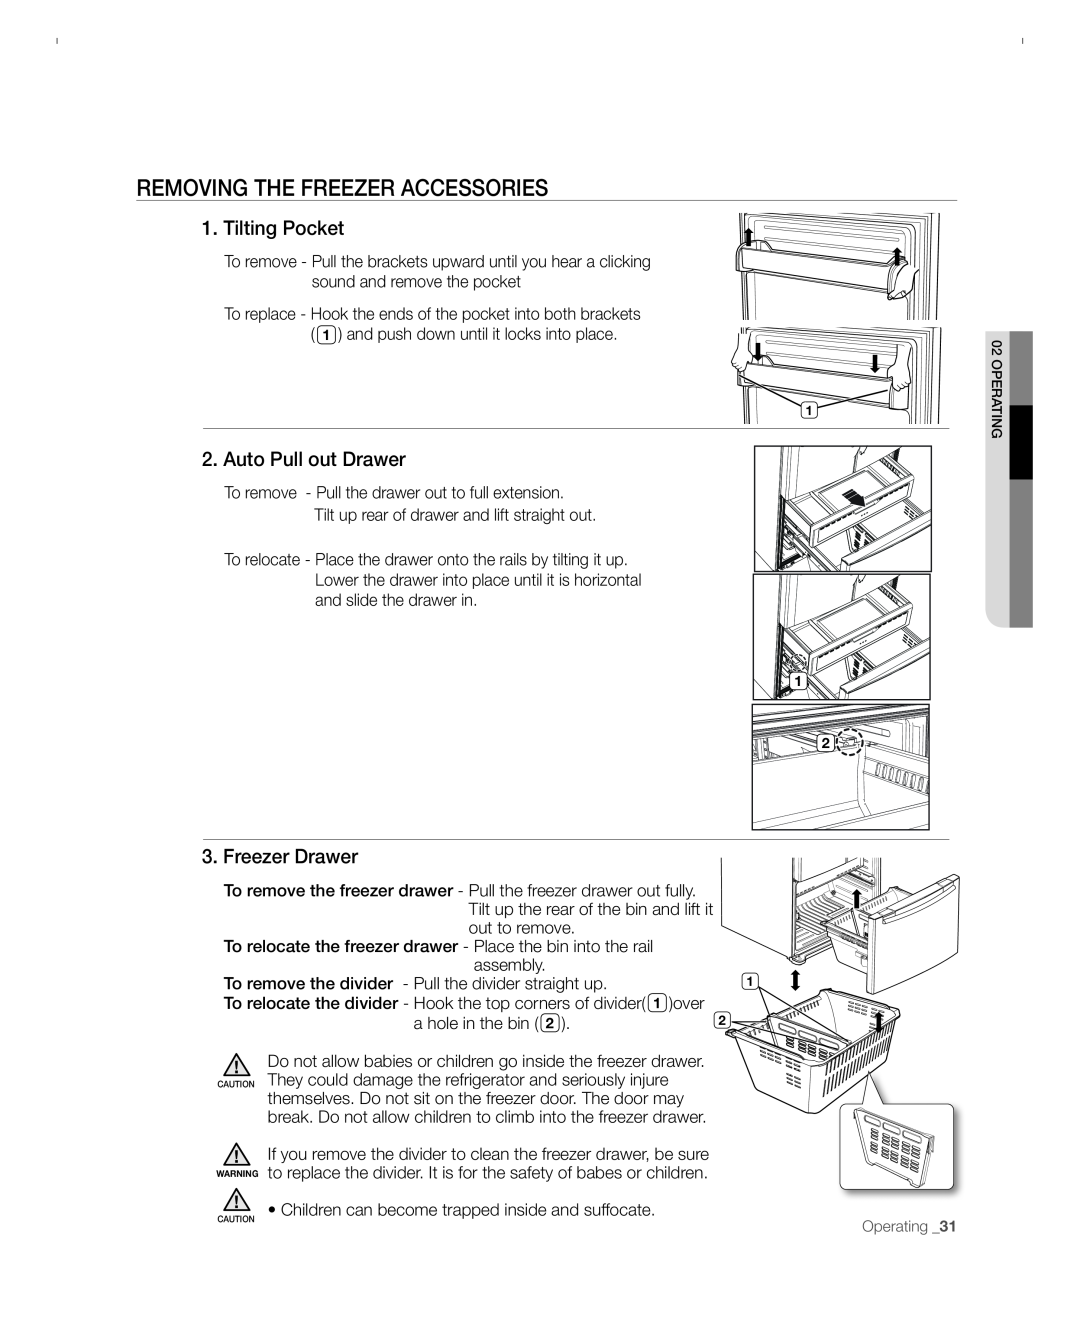 Samsung RFG297ACBP user manual Removing The Freezer Accessories, Tilting Pocket, Auto Pull out Drawer, Freezer Drawer 